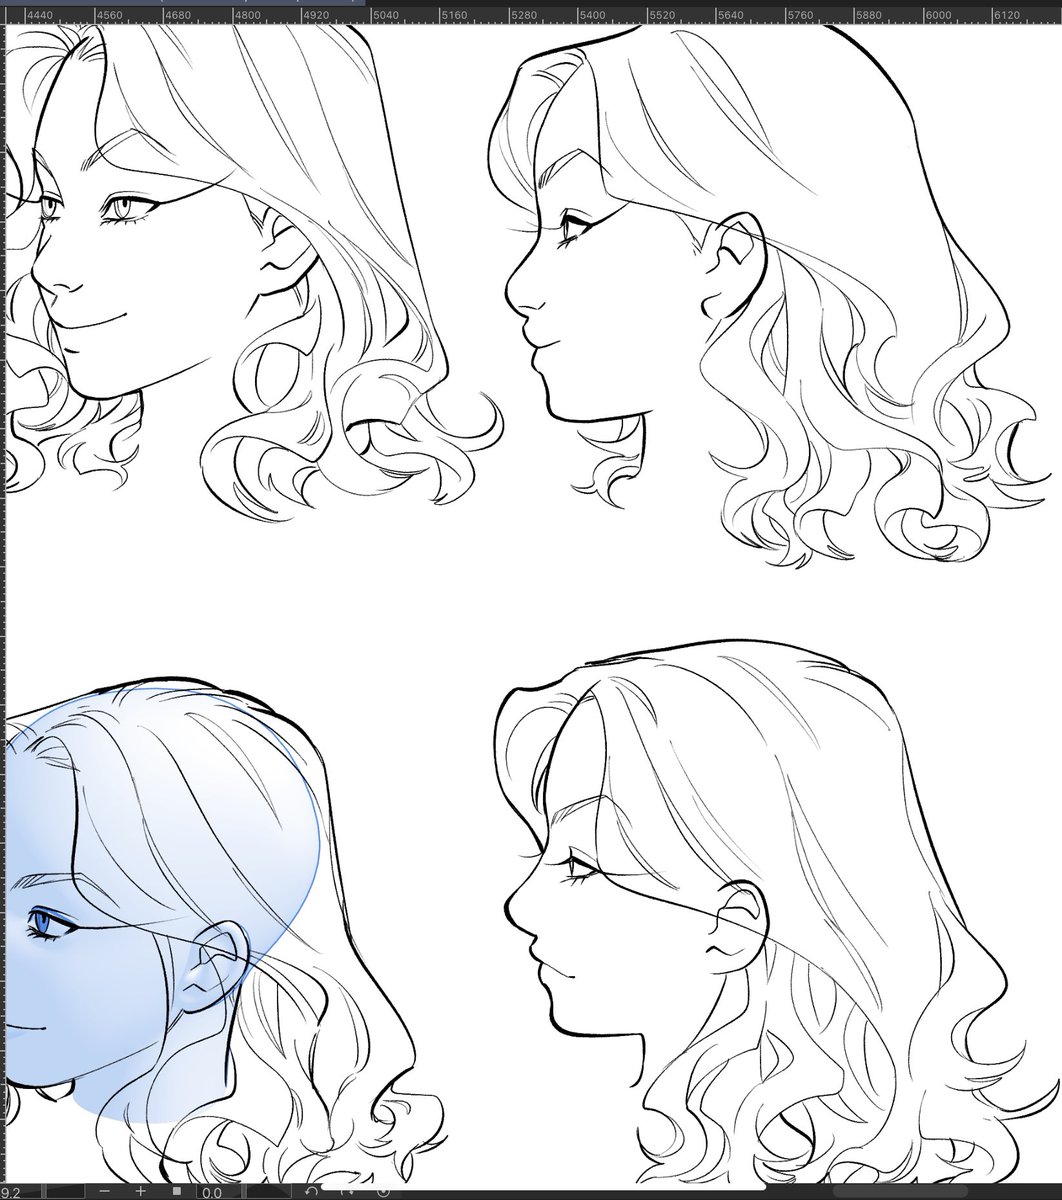 I finally got off my ass to do these head references. After these I am NEVA drawing heads for this comic again 🤣 